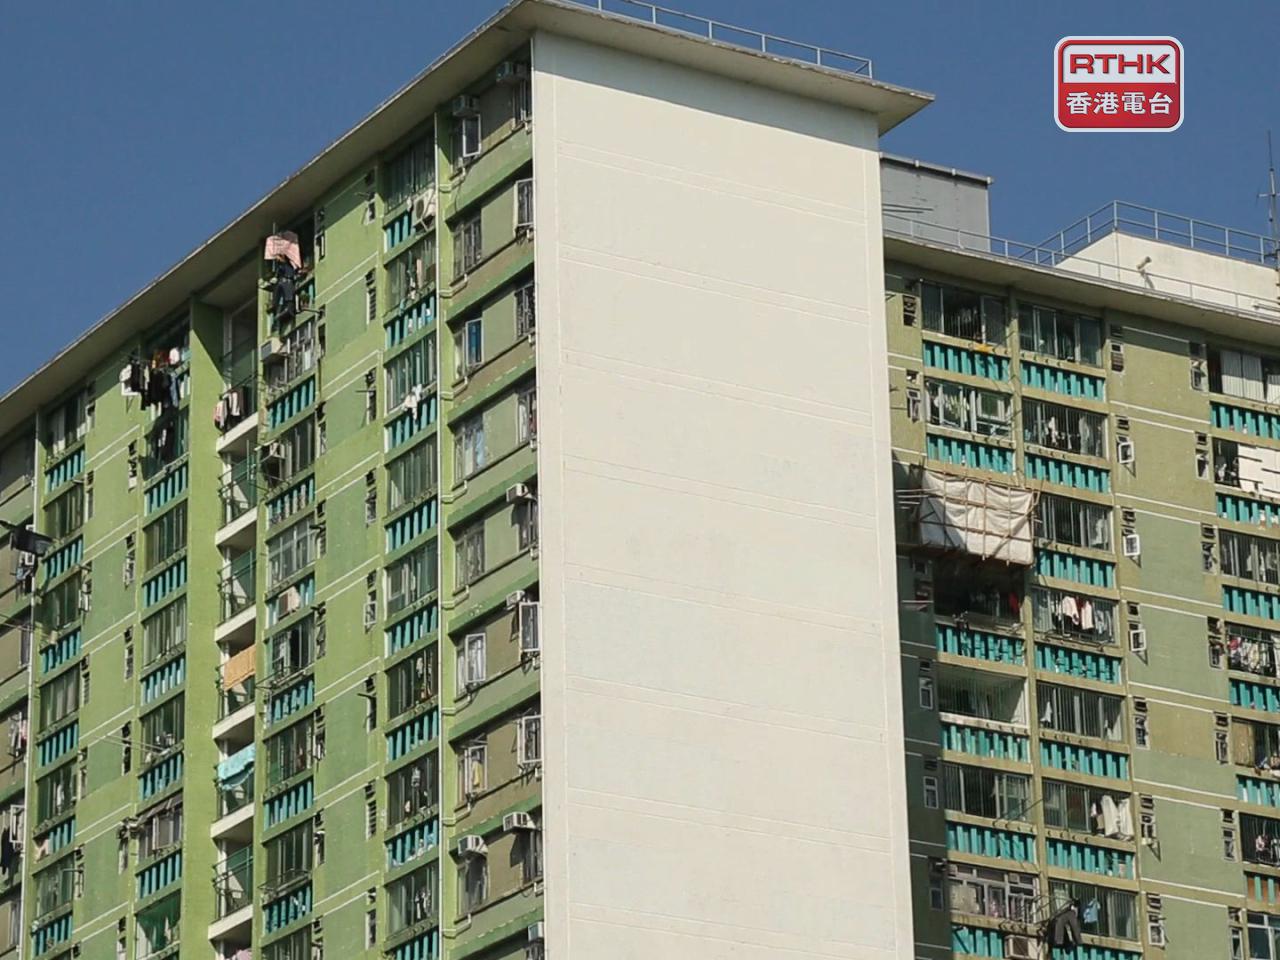 Public housing tenants to pay 10 percent more in rent